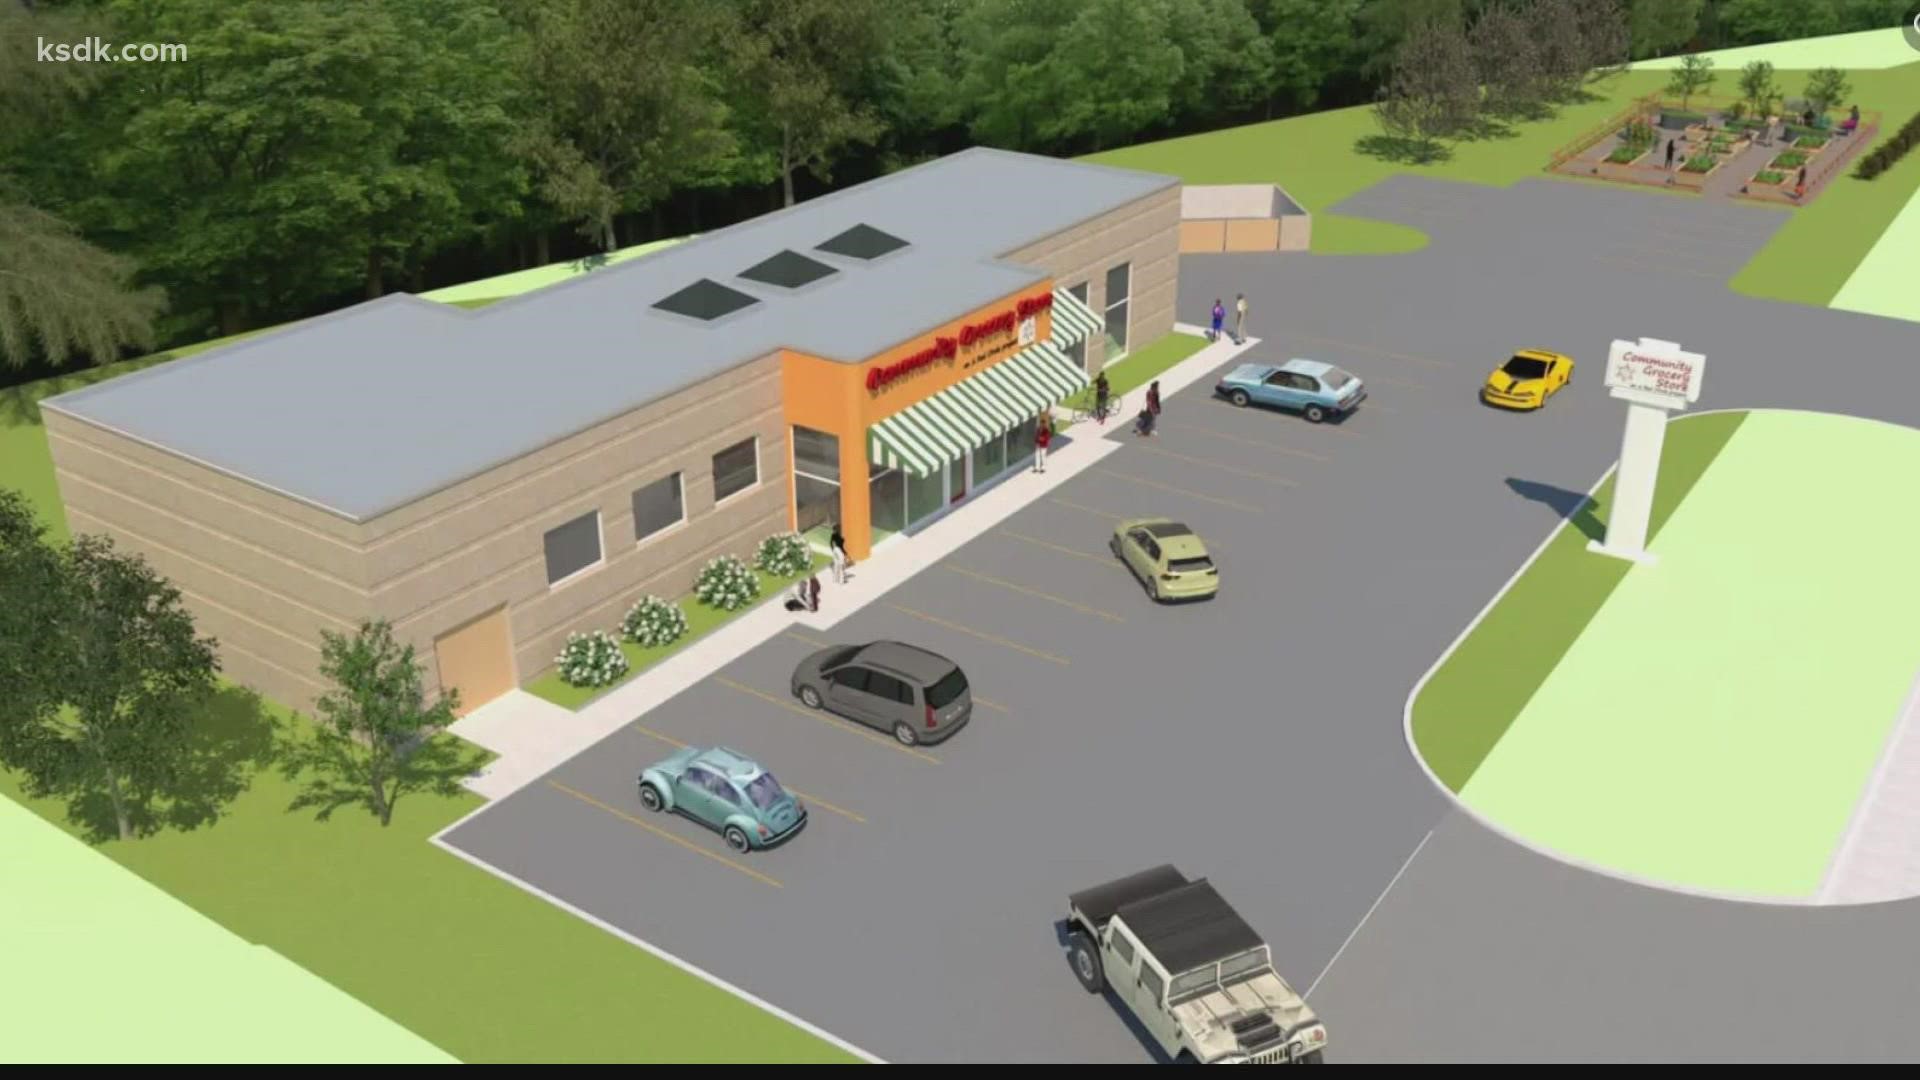 A Red Circle Nonprofit wants to offer healthier food options with a community-owned grocery store on New Halls Ferry Road.